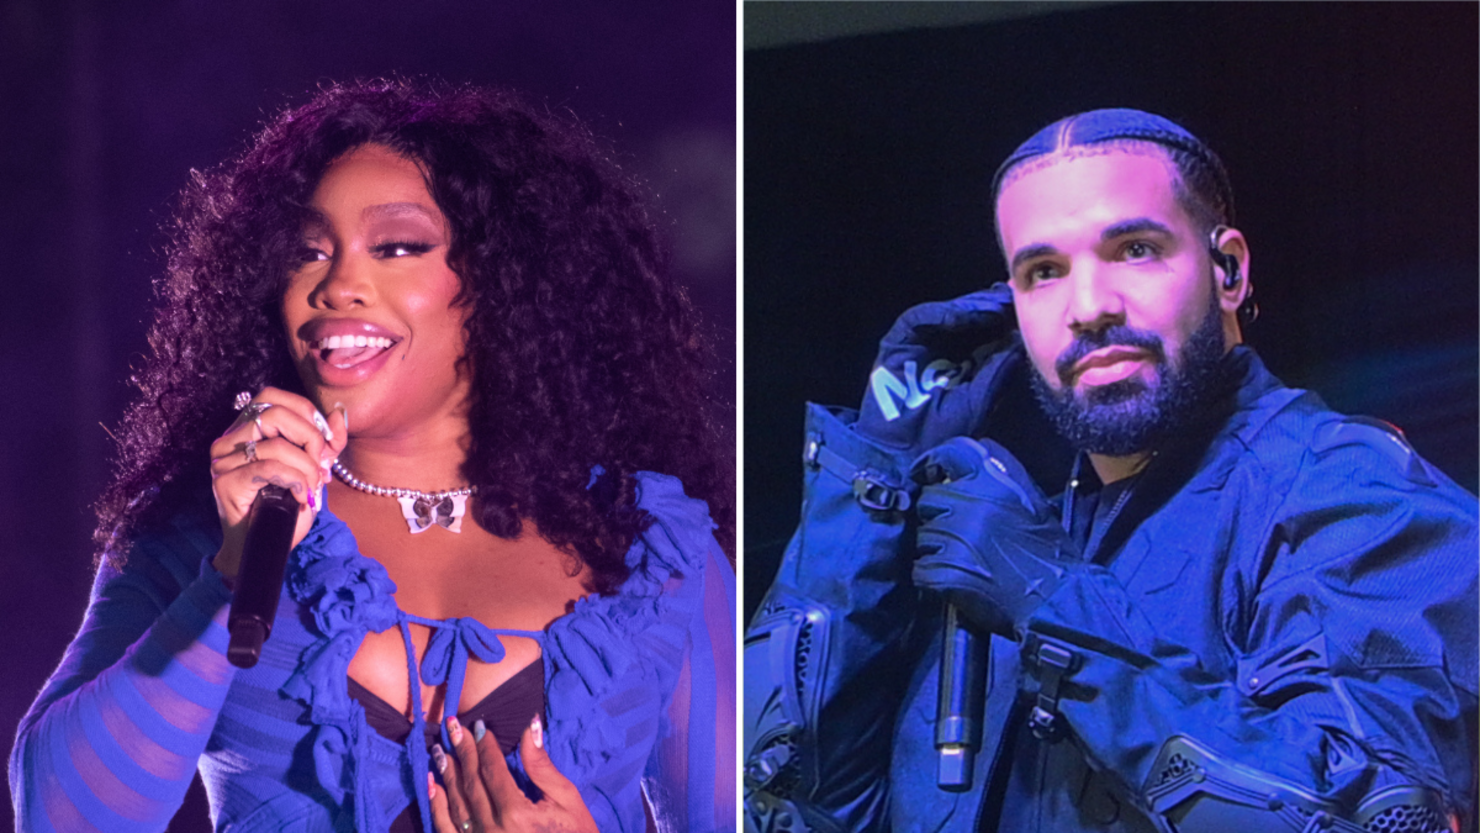 SZA Compares Drake To This 'Mean Girl' While Speaking On Past